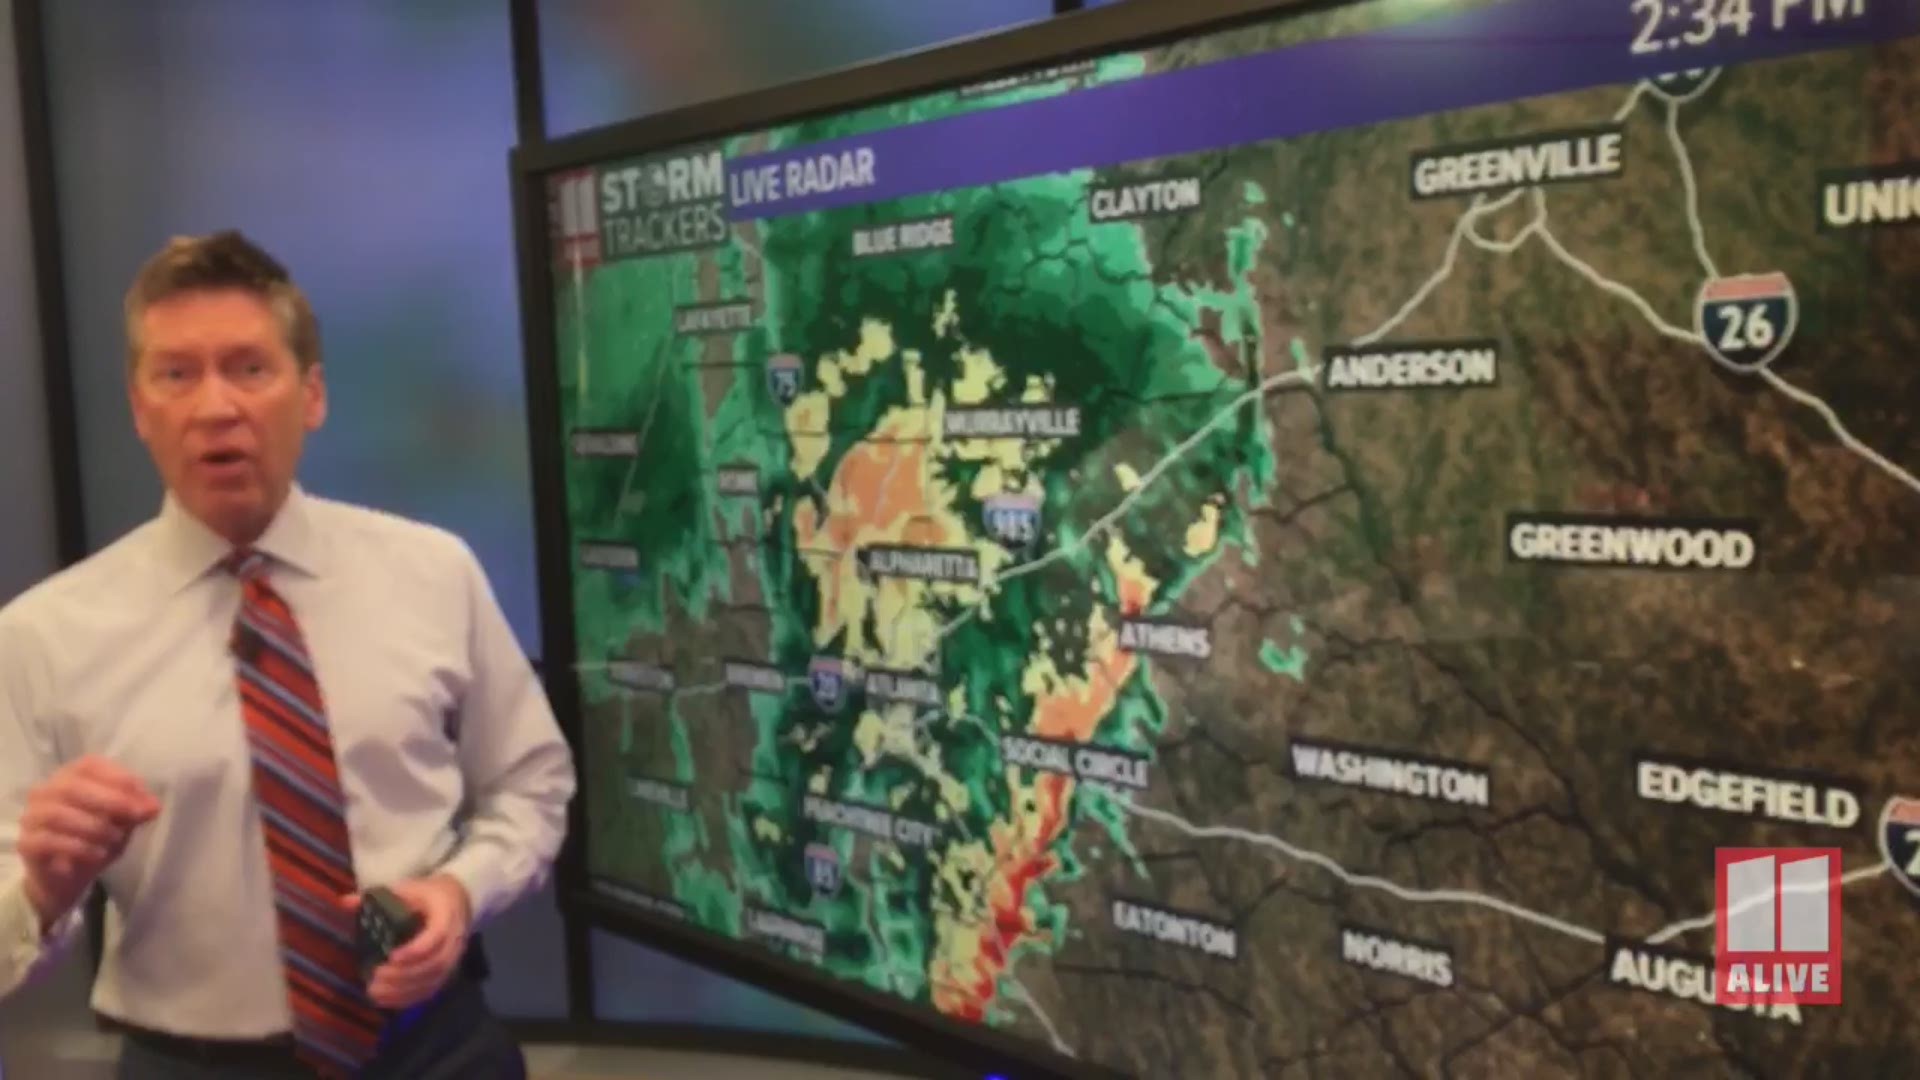 After heavy rain Tuesday aternoon, the severe weather threat has diminished for metro Atlanta, ahead of more general rain through the afternoon commute.